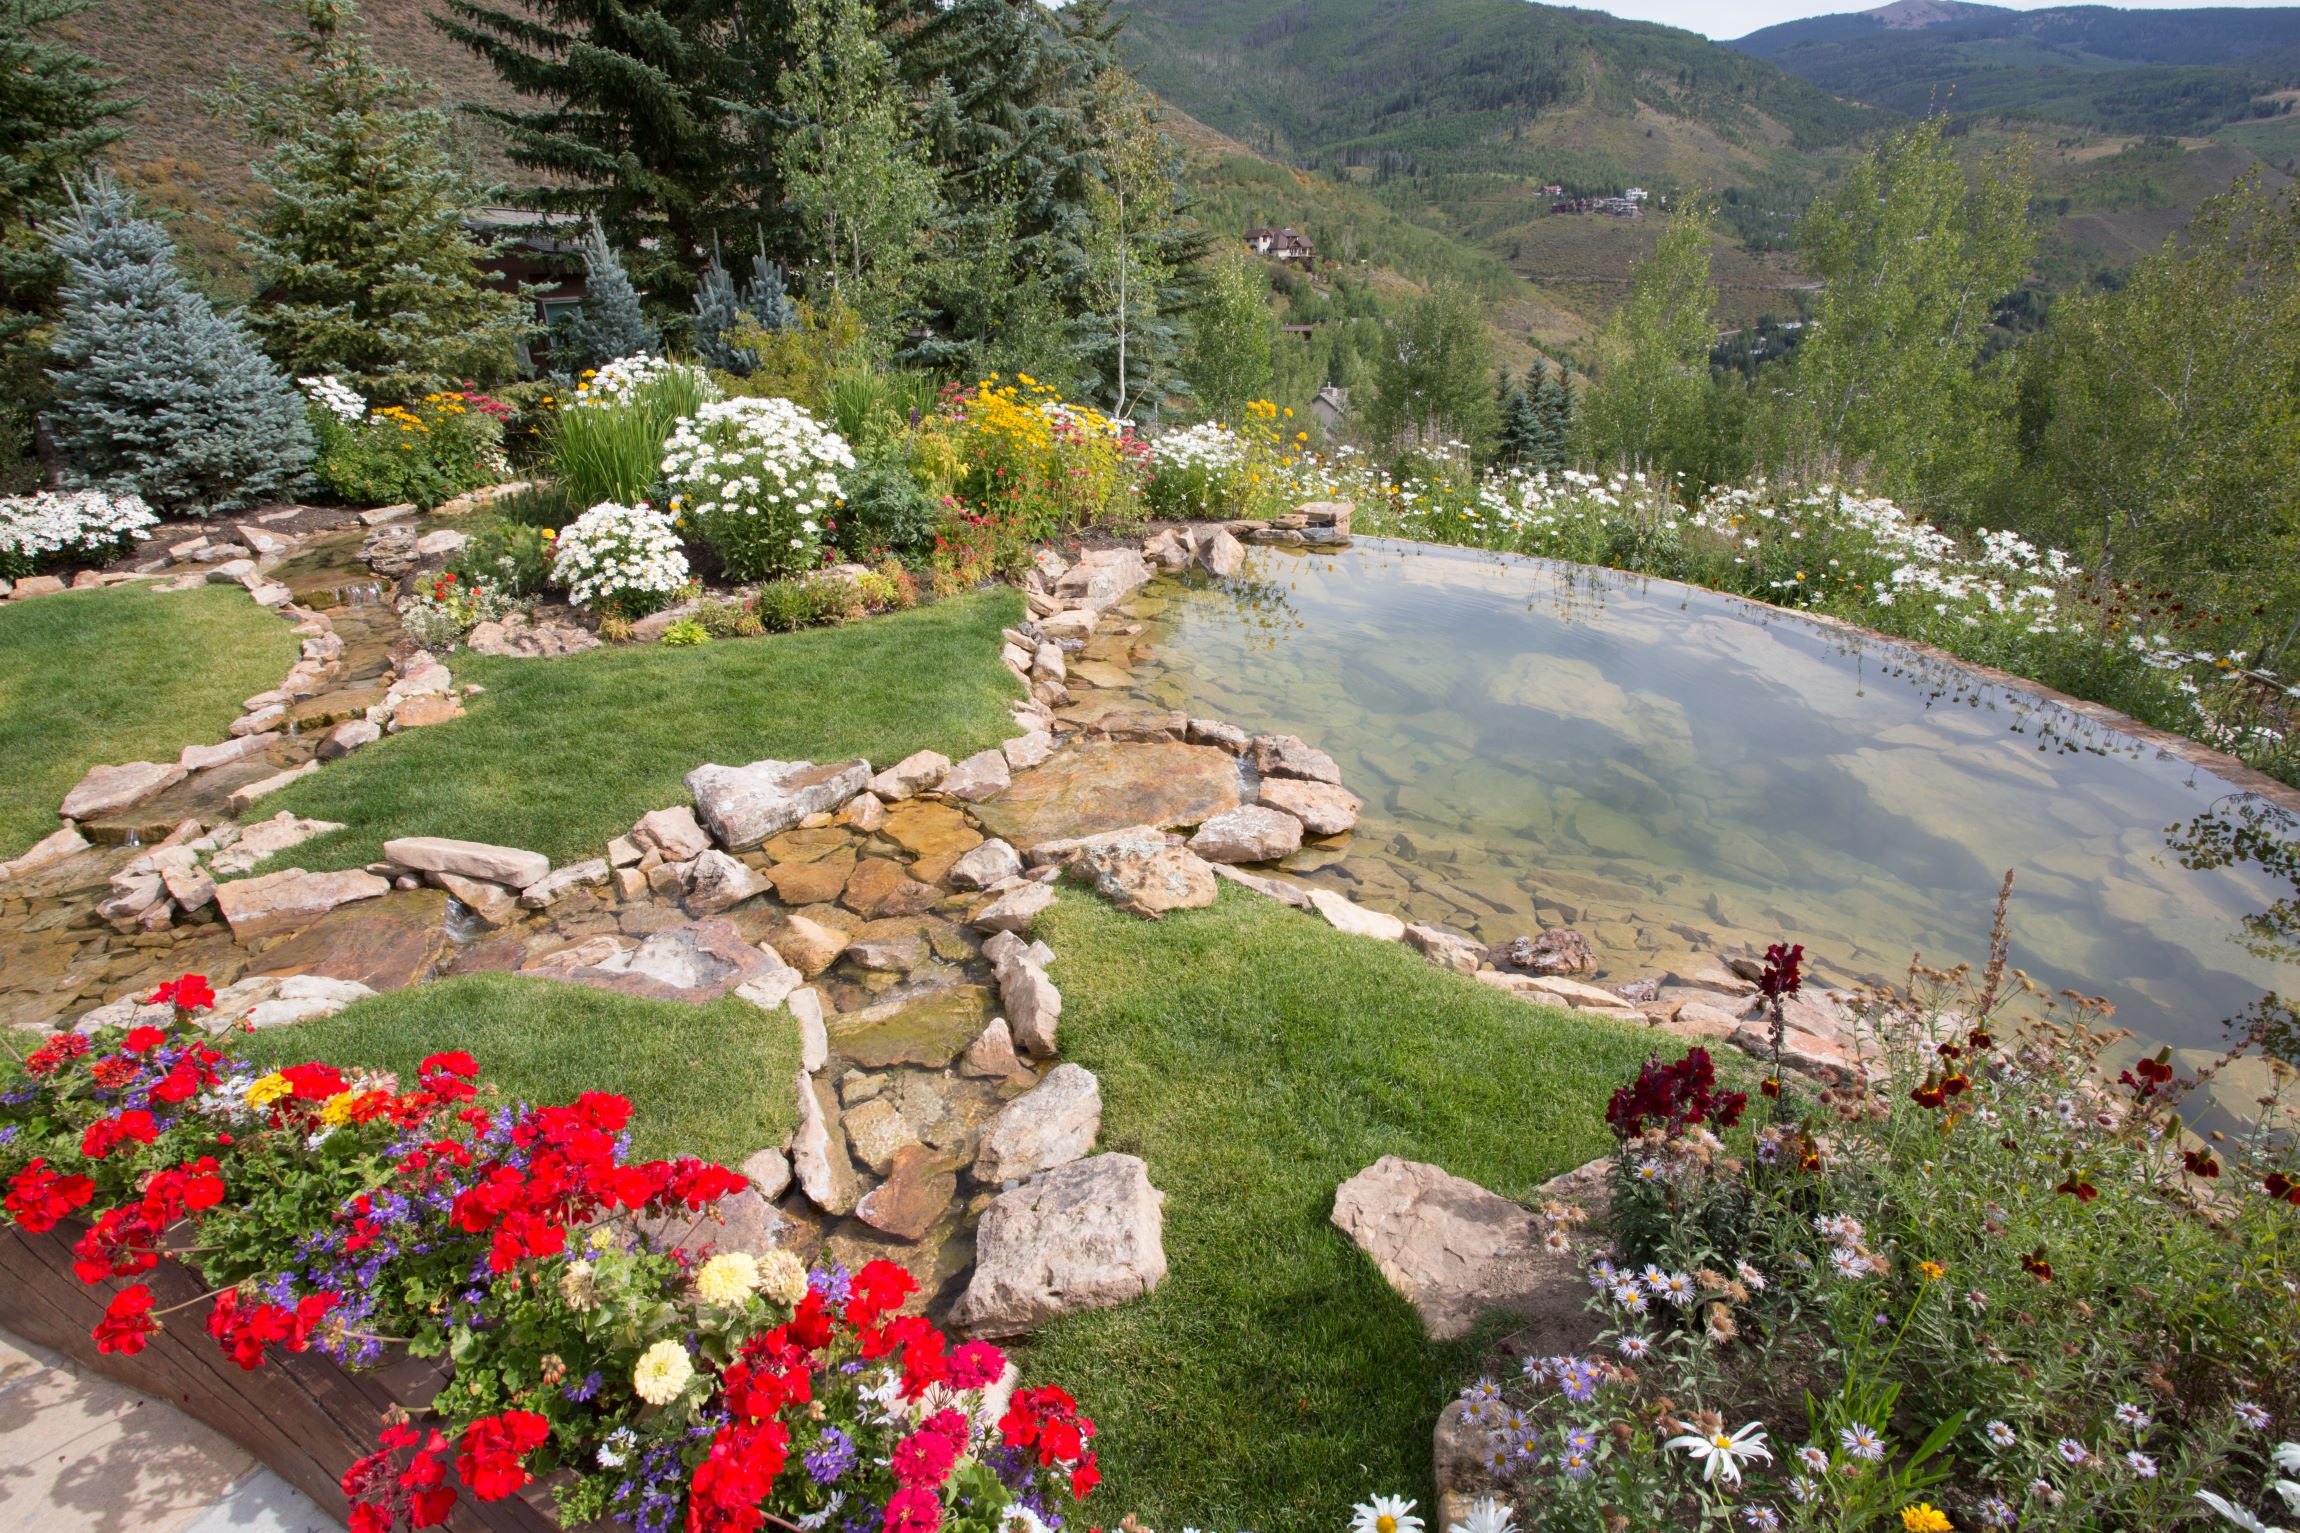 A picturesque garden with a natural pond, surrounded by colorful flowers and stone pathways, nestled in a lush landscape with a hillside backdrop.